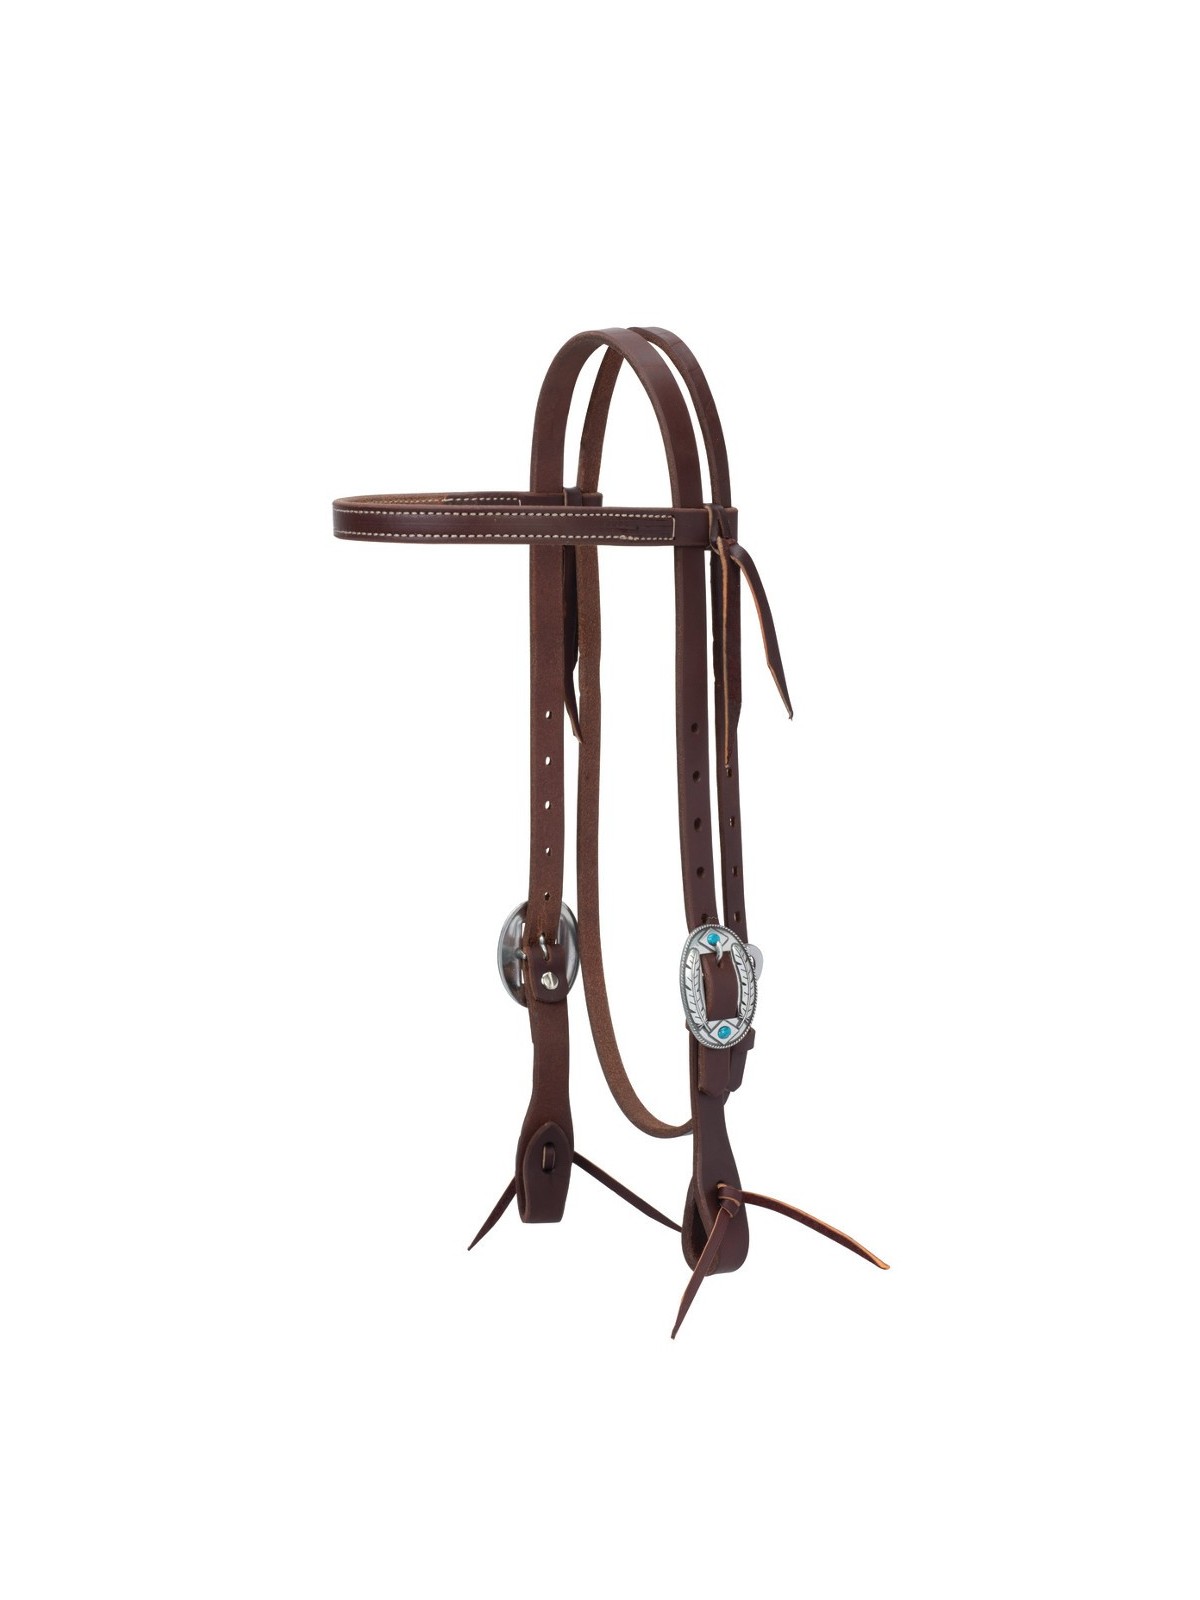 Weaver Leather Working Cowboy Tack Browband Headstall 10-0605